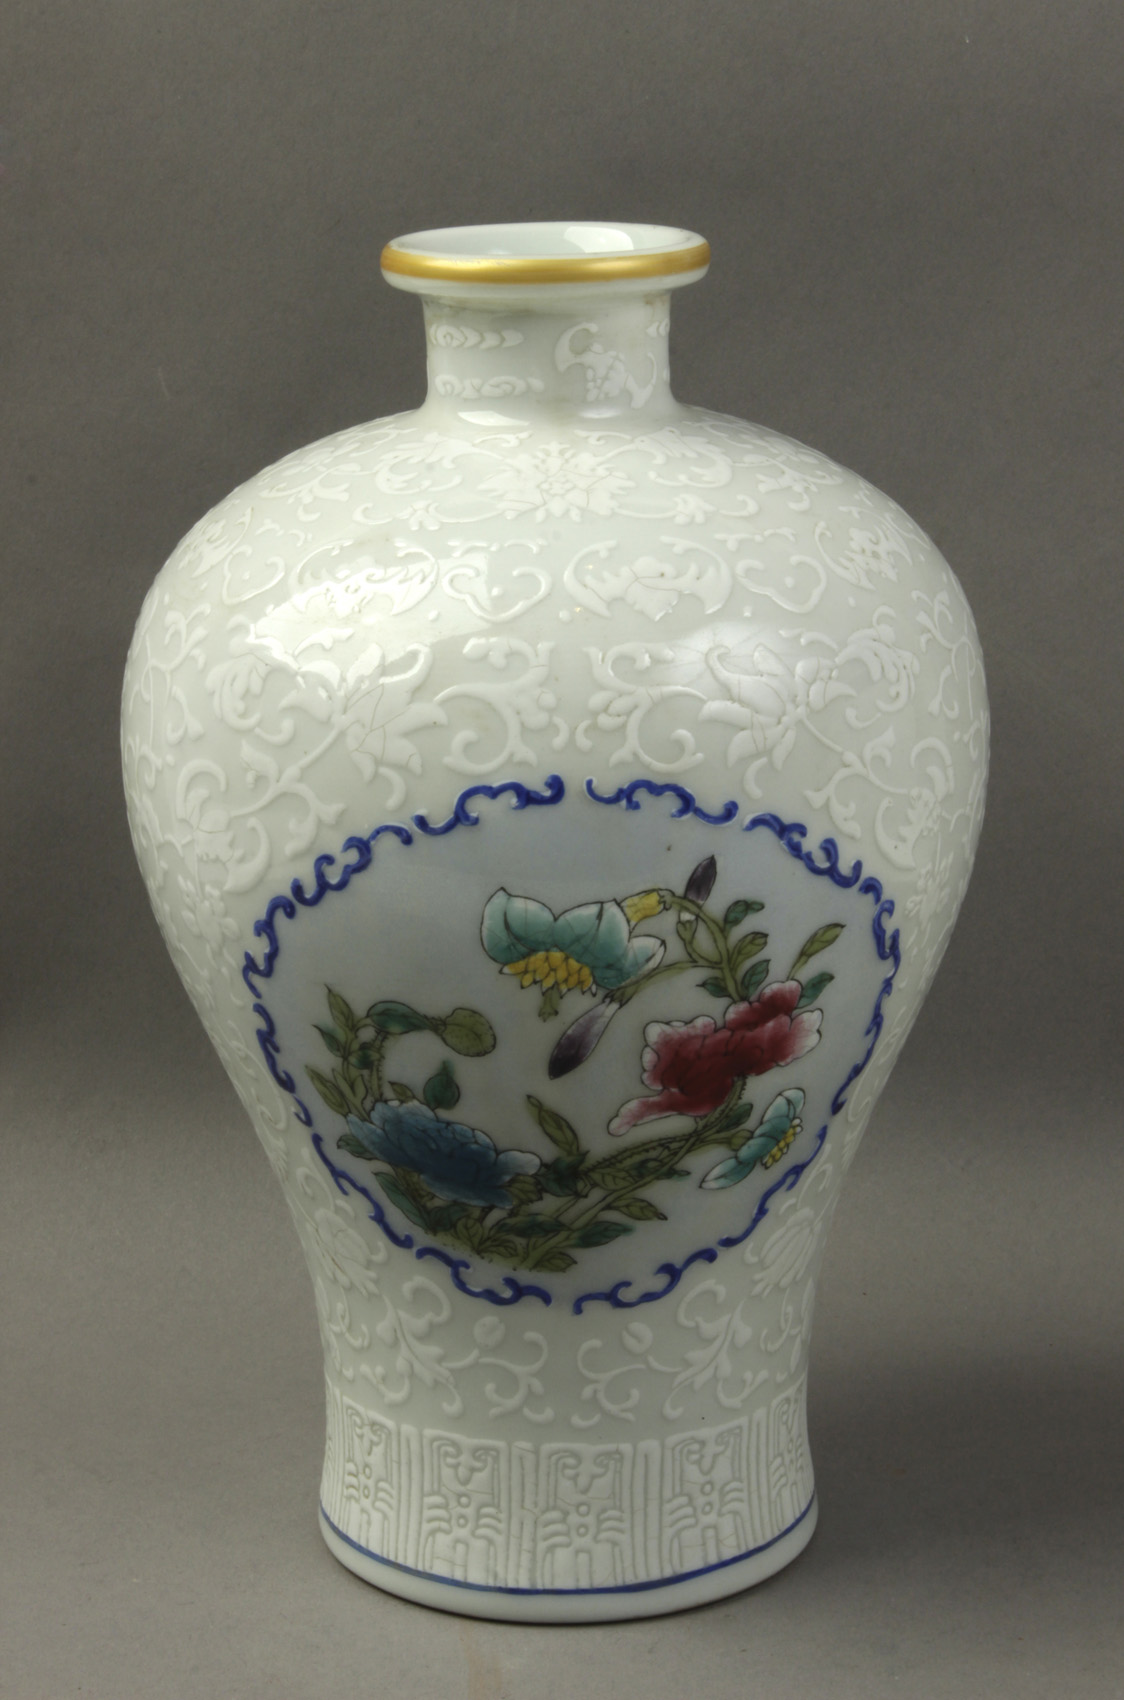 A 20th century Chinese vase in celadon porcelain